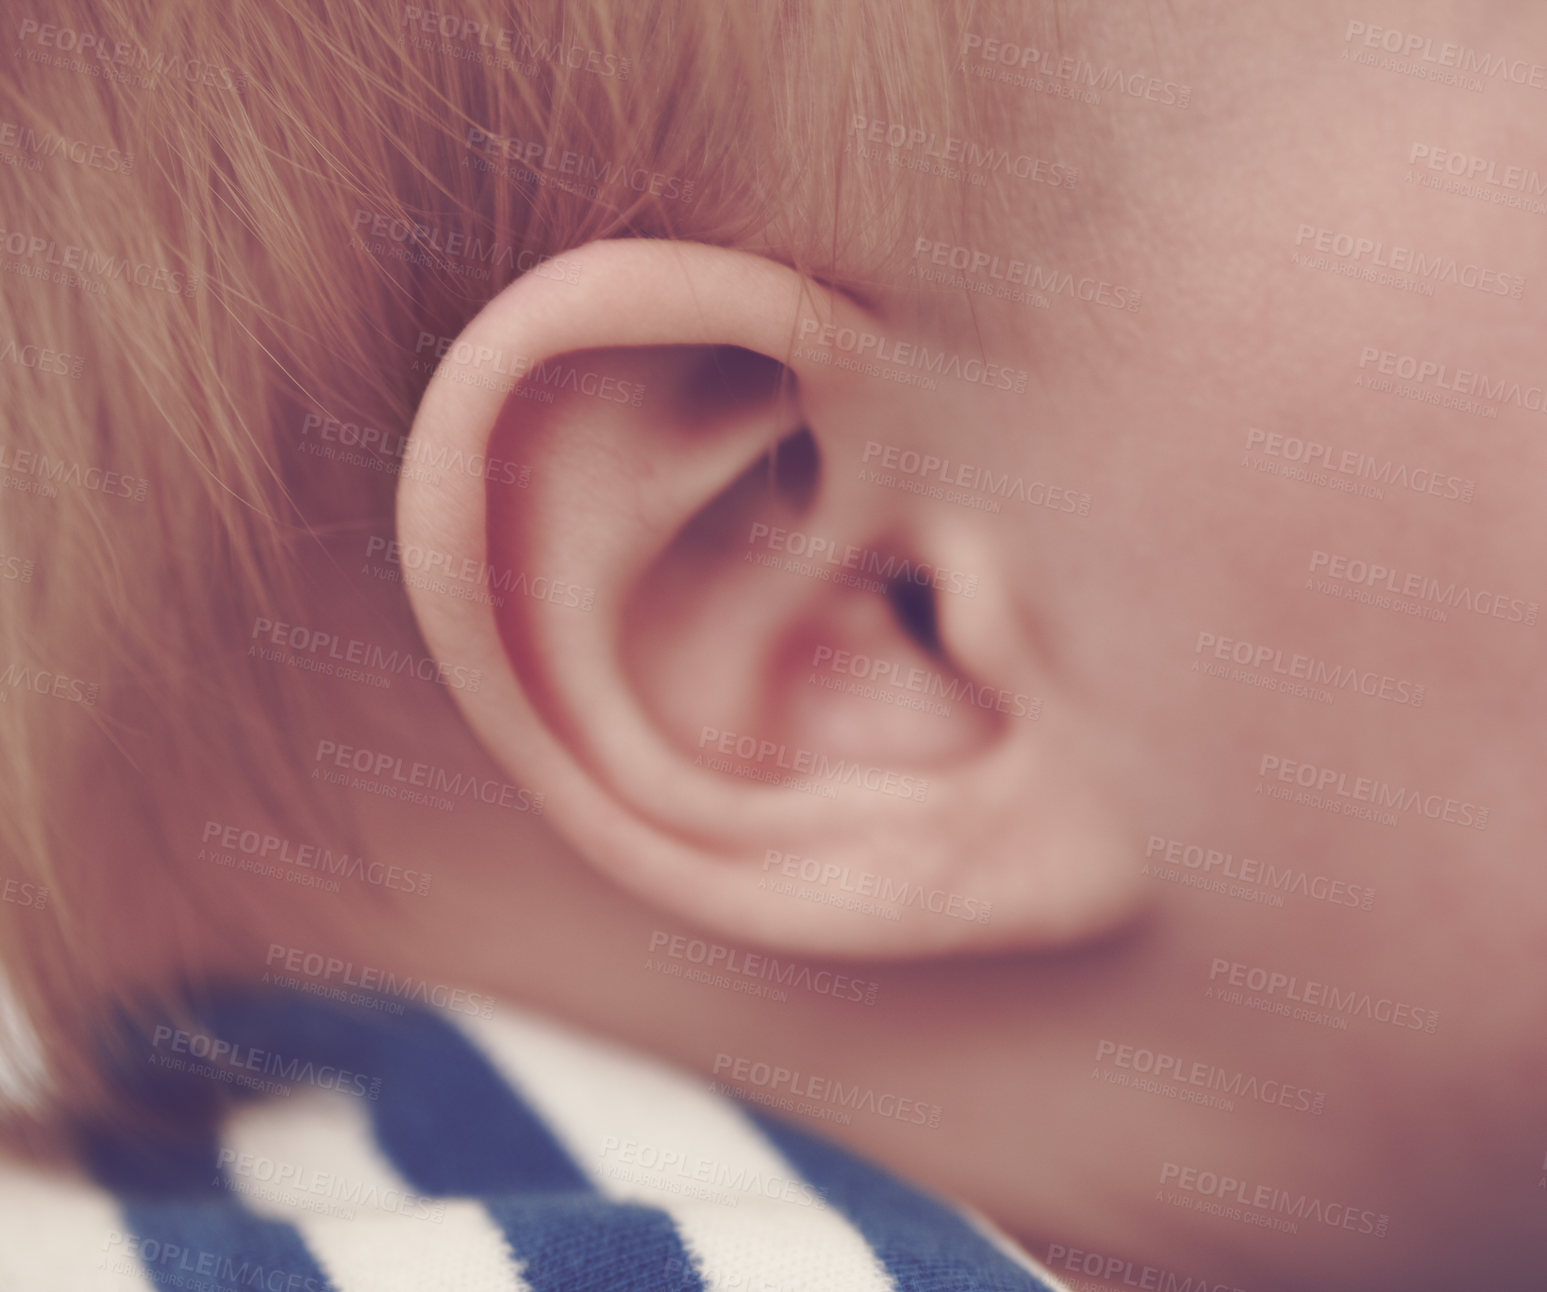 Buy stock photo Cropped closeup of a baby's ear